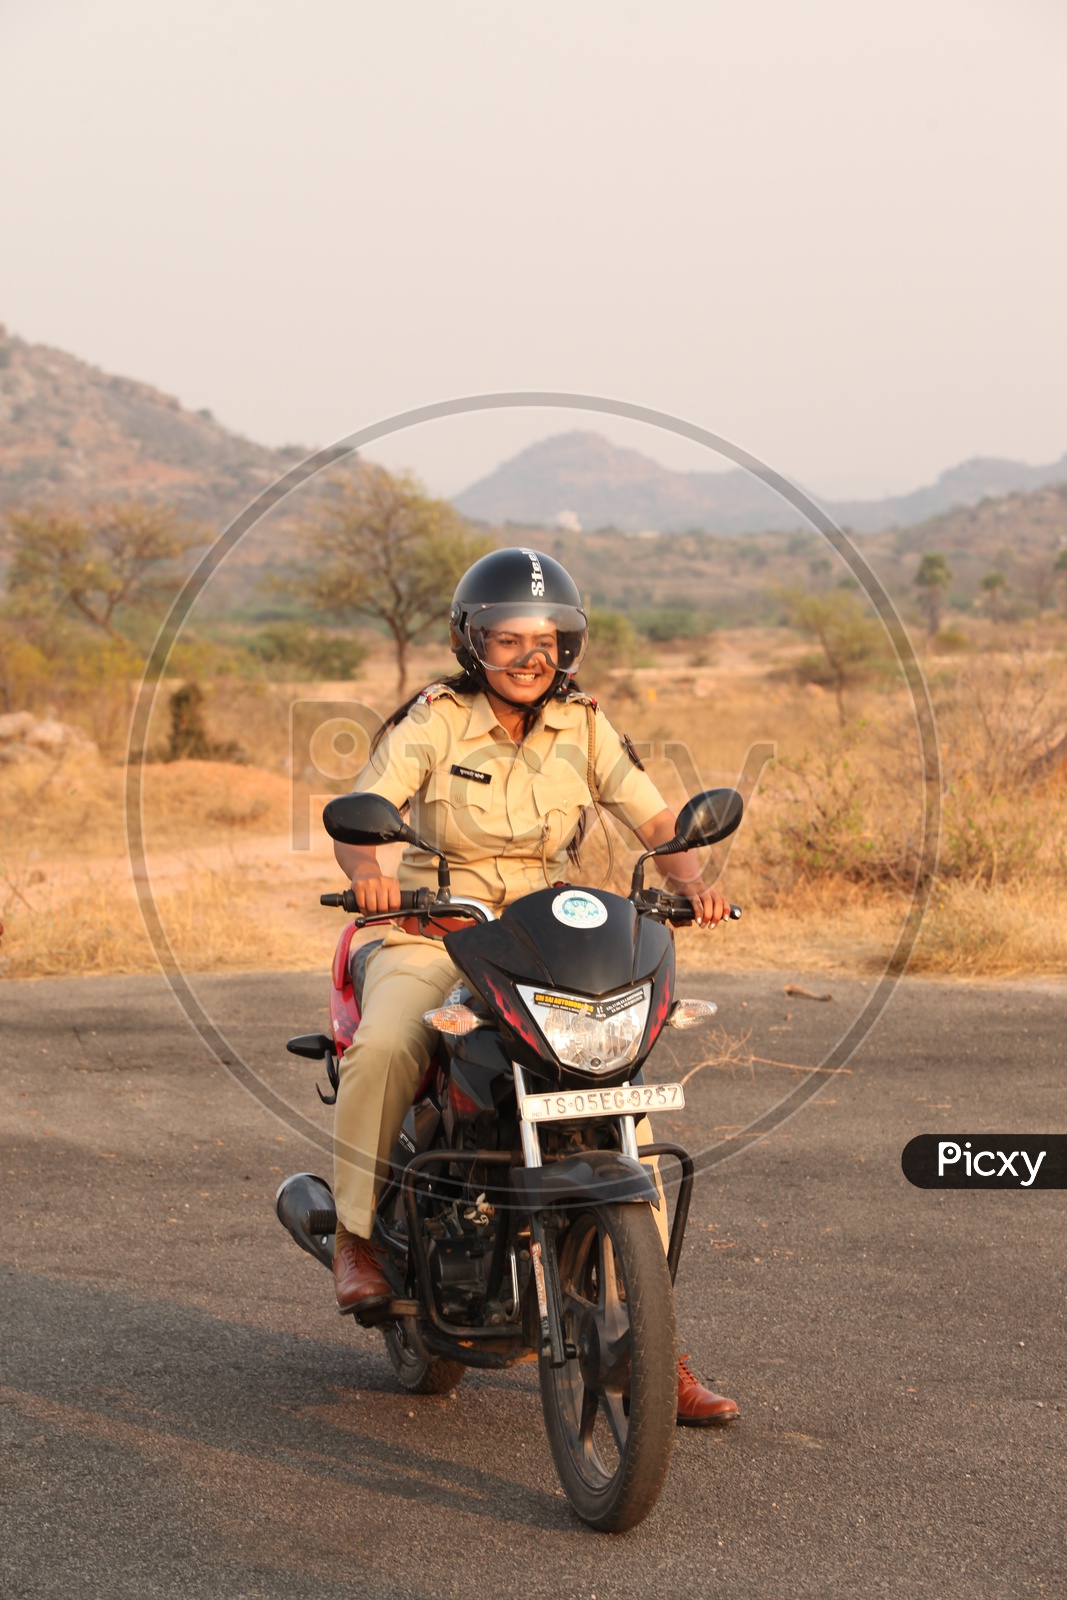 Woman Or Lady Police Driving Bike